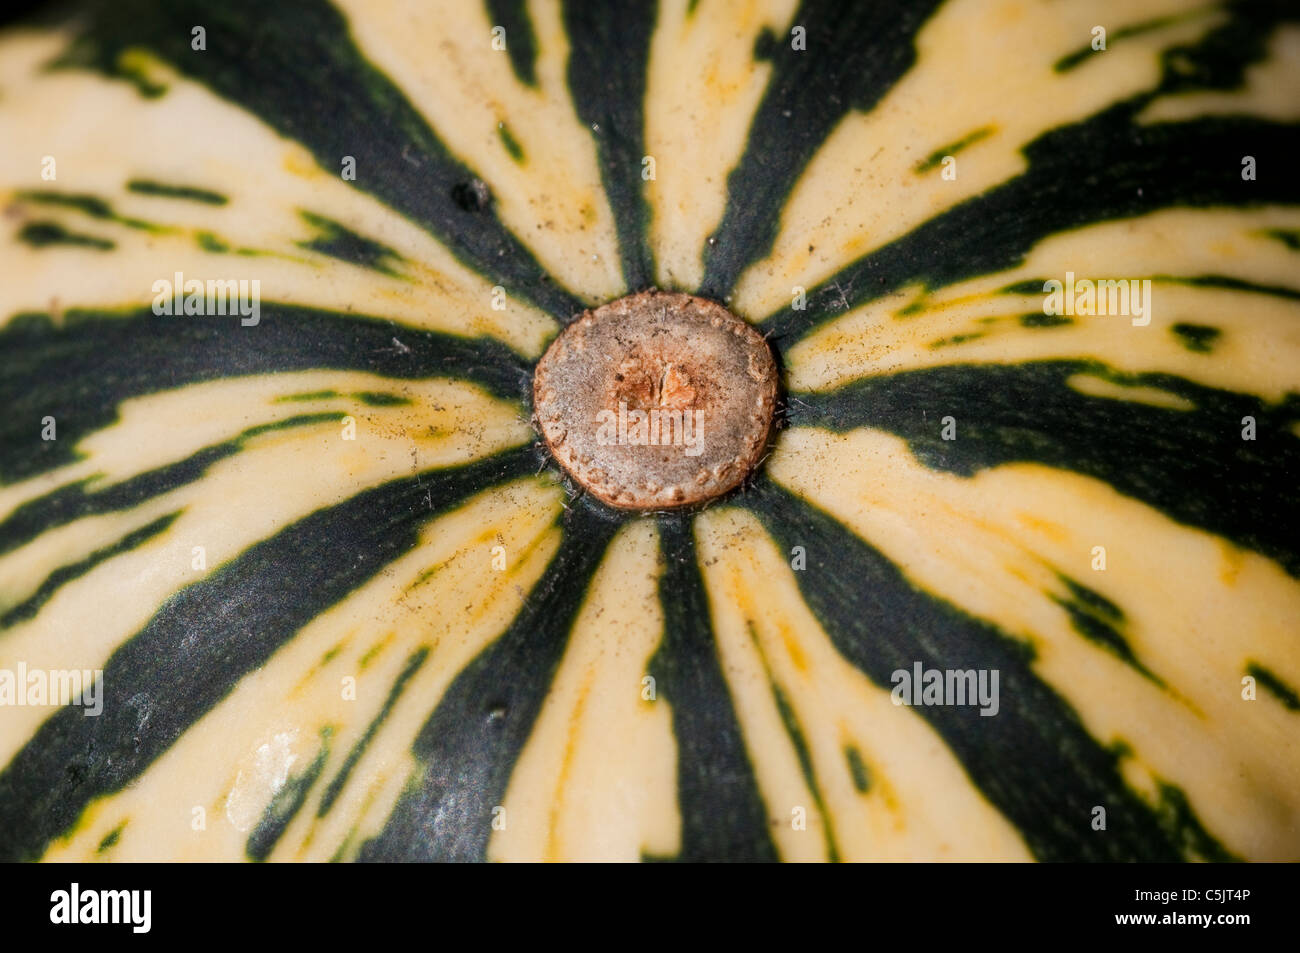 Delicata, a kind of striped winter squash, as seen from the bottom. Stock Photo